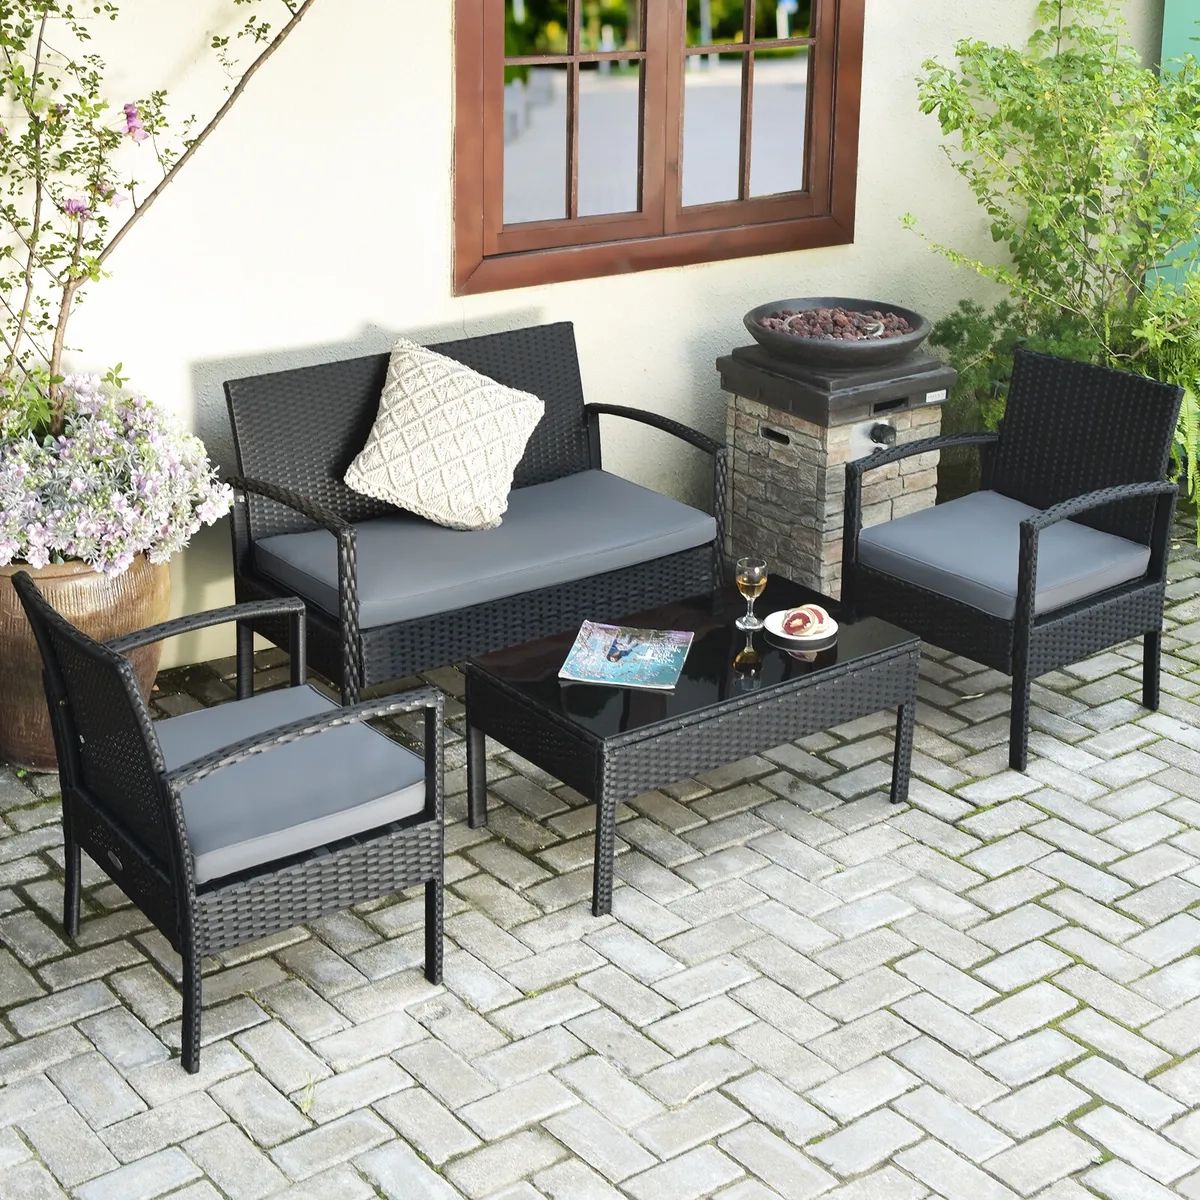 4Pcs Outdoor Patio Rattan Furniture Set Cushioned Sofa Coffee Table Chair  Deck | Ebay In 4Pcs Rattan Patio Coffee Tables (View 2 of 15)